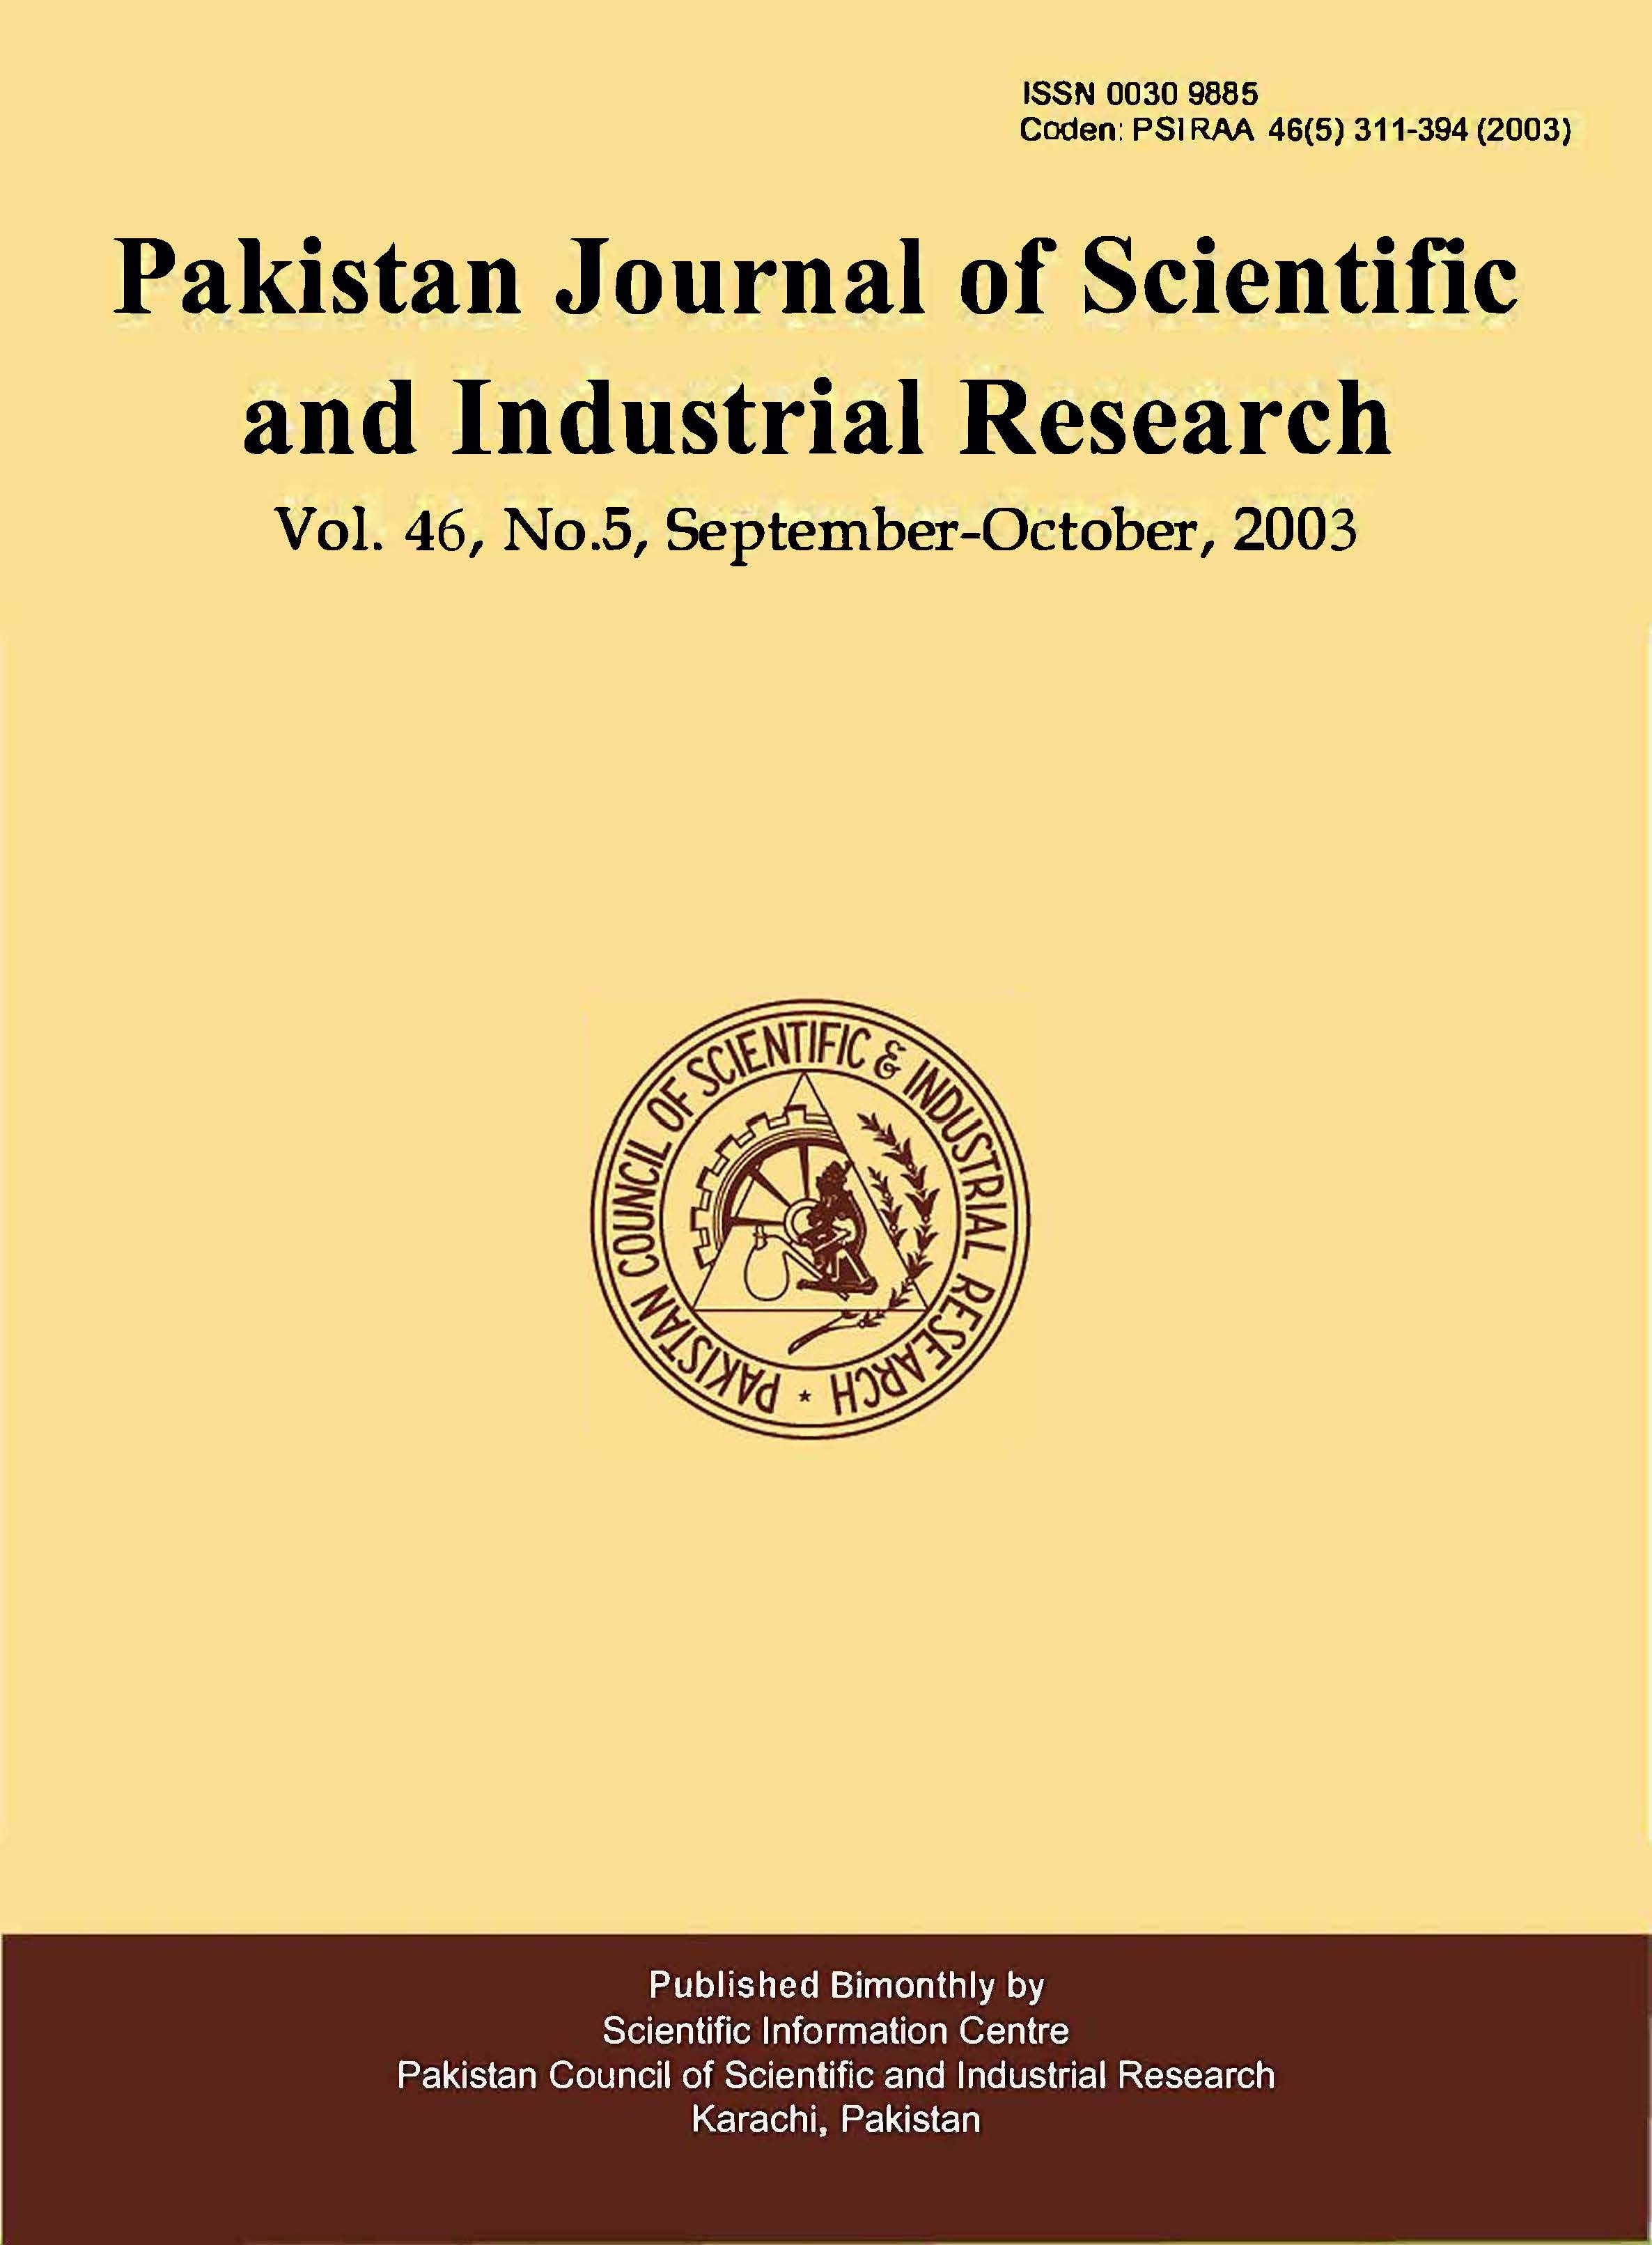 					View Vol. 46 No. 5 (2003): Pakistan Journal of Scientific and Industrial Research
				